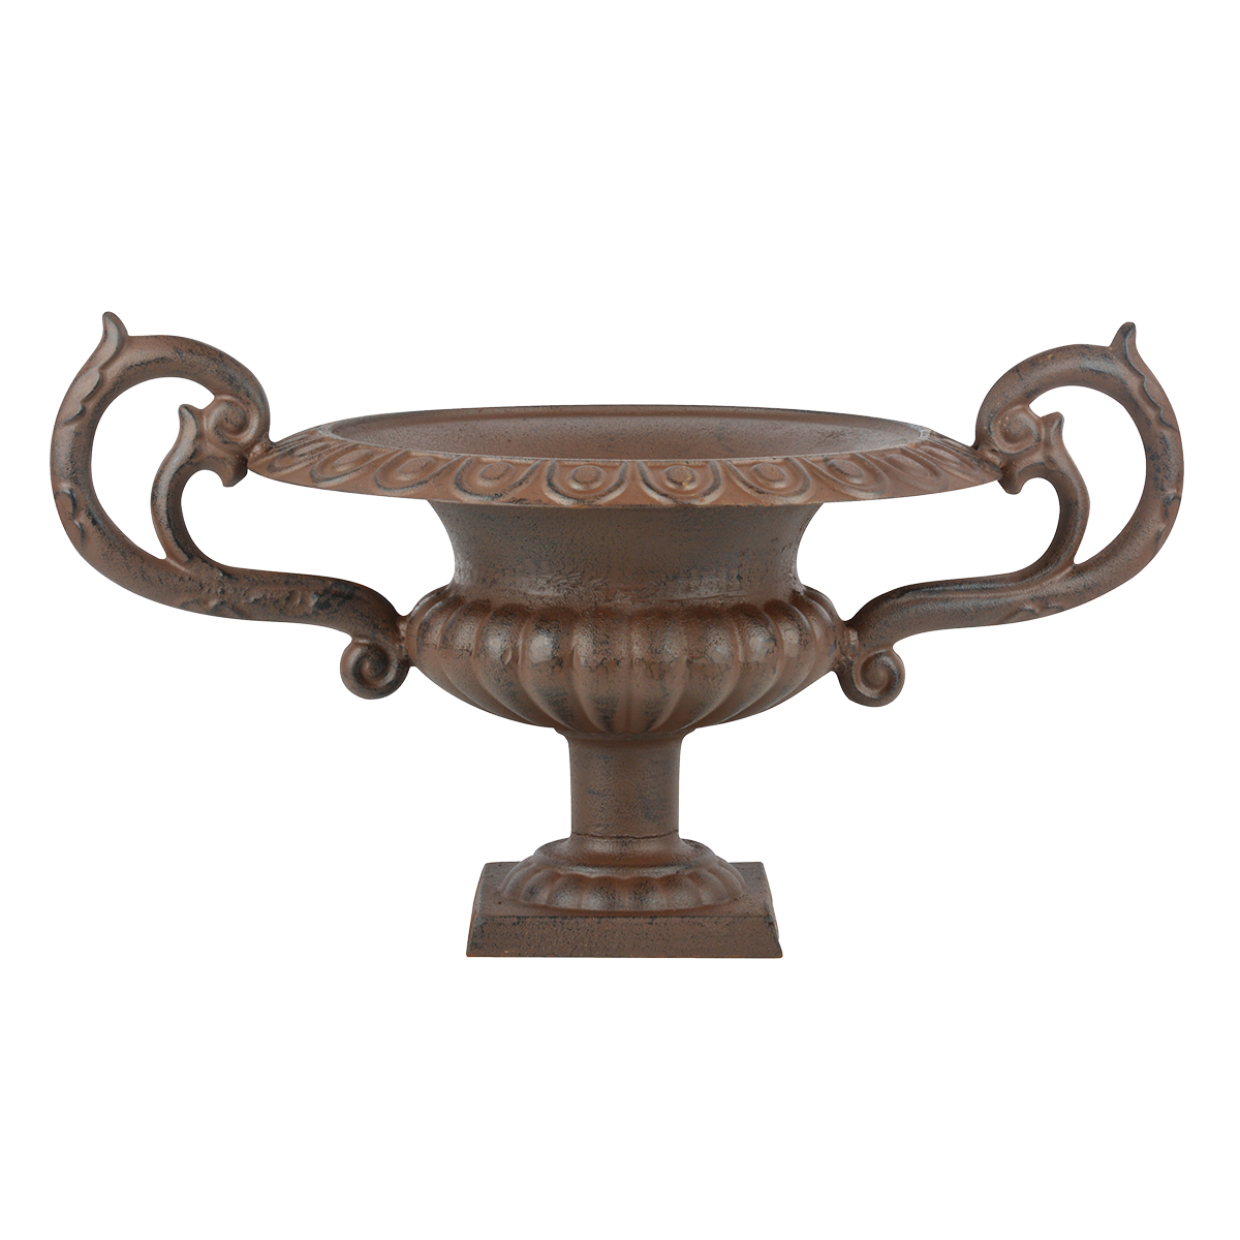 Low French Urn w/Handles, Cast Iron, Antique Brown - Large